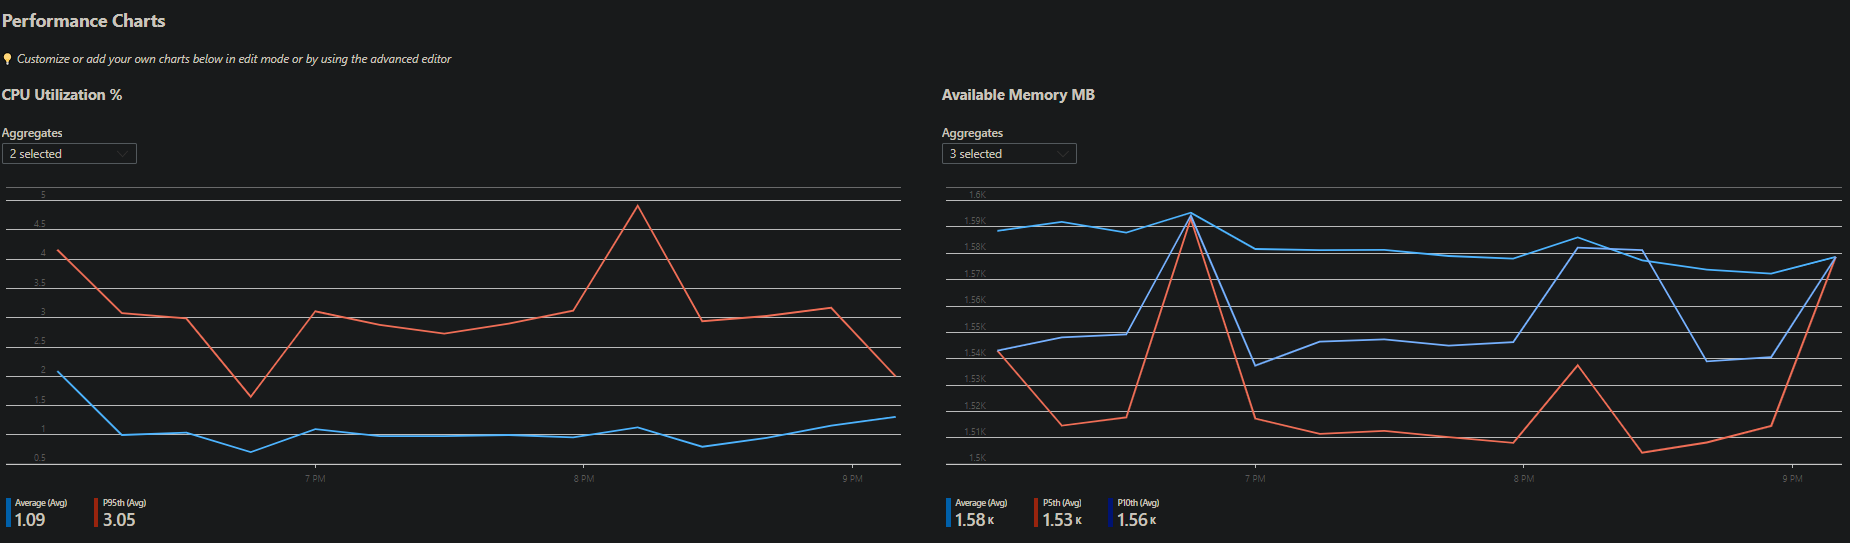 Viewing CPU and Memory Performance Charts